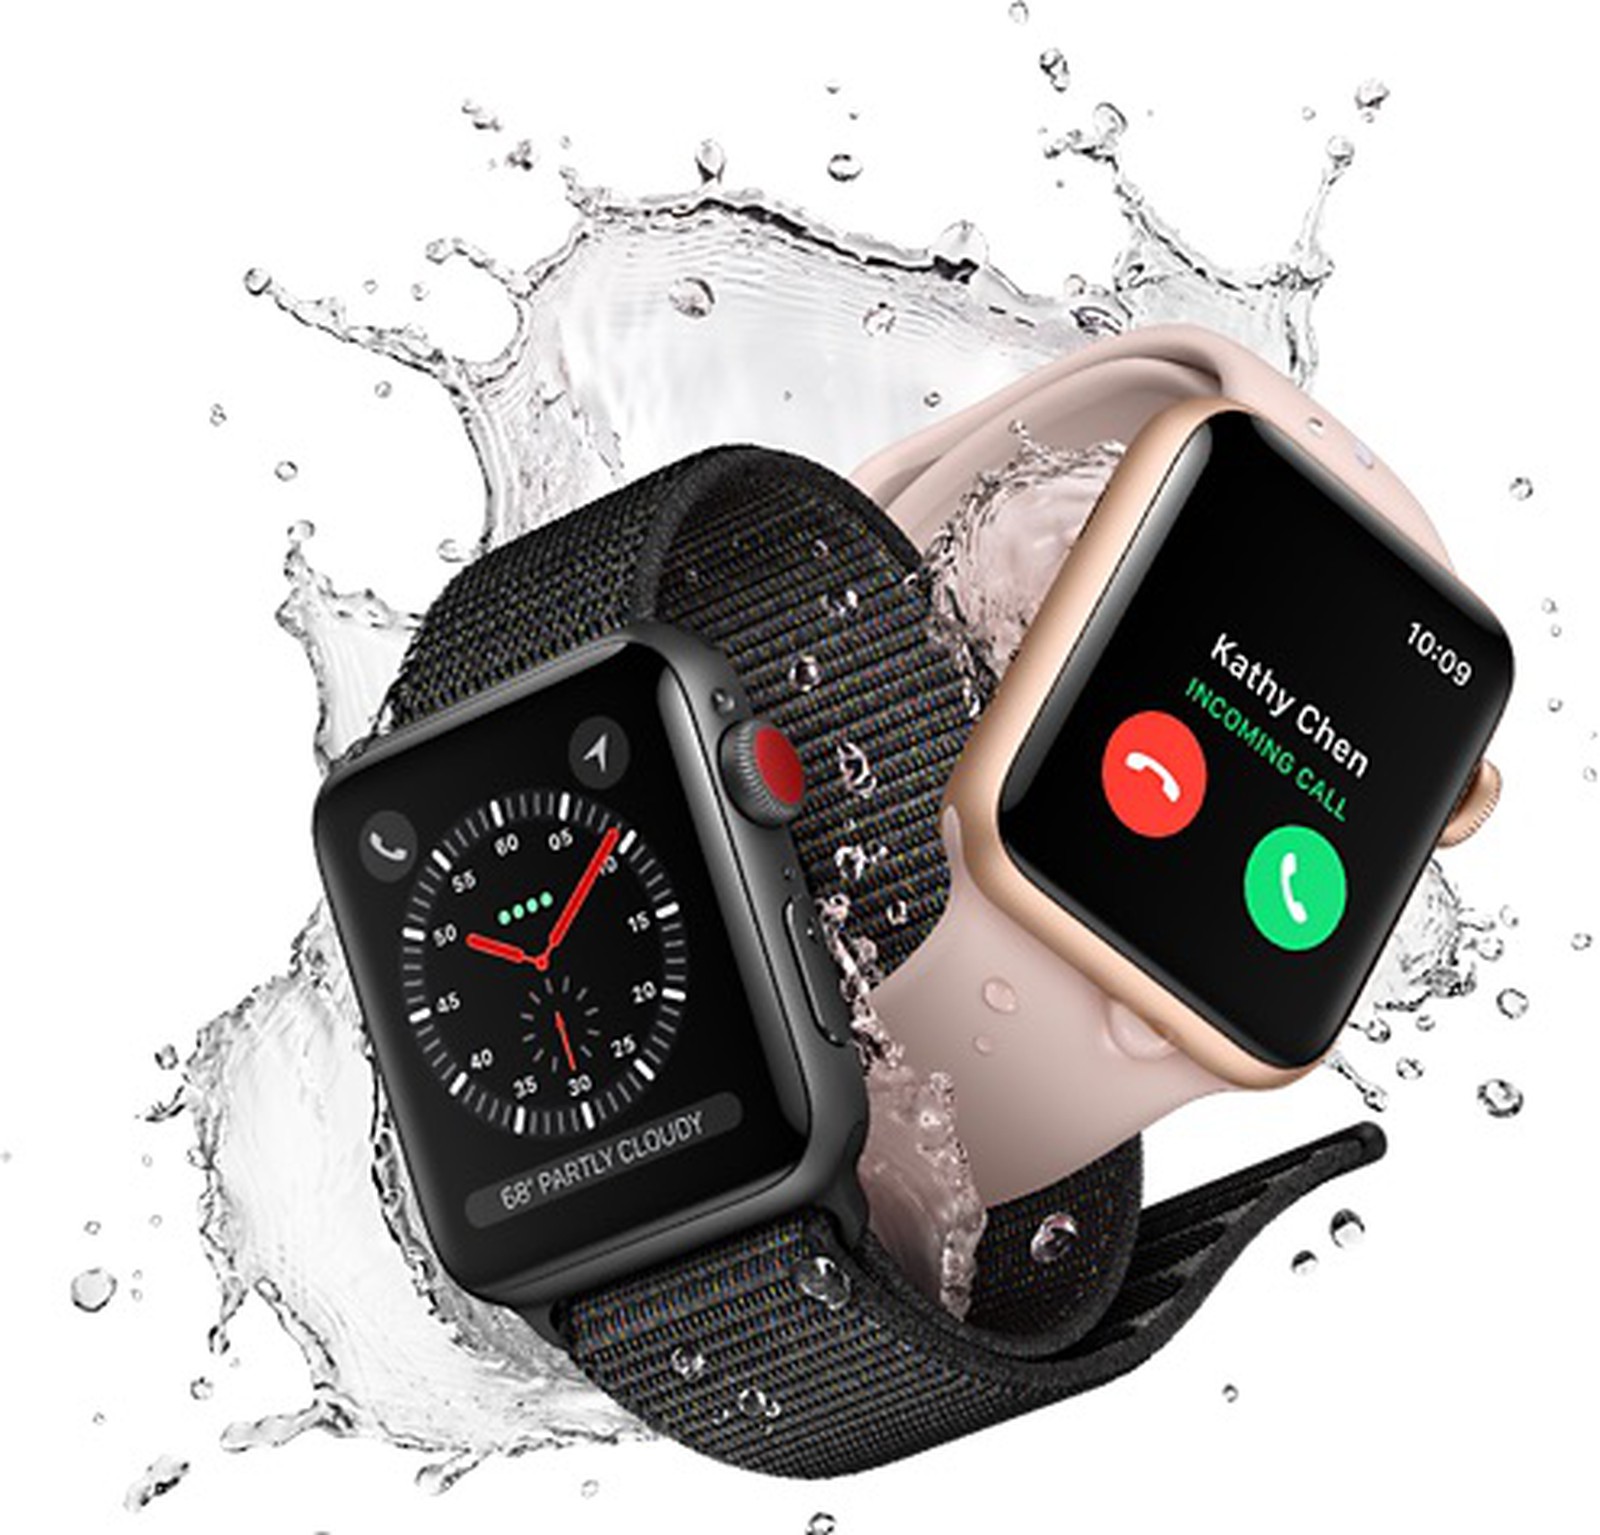 Apple Watch Series 3: LTE Plan Prices on Verizon, AT&T, Sprint, T-Mobile, Bell, EE, and Deutsche 